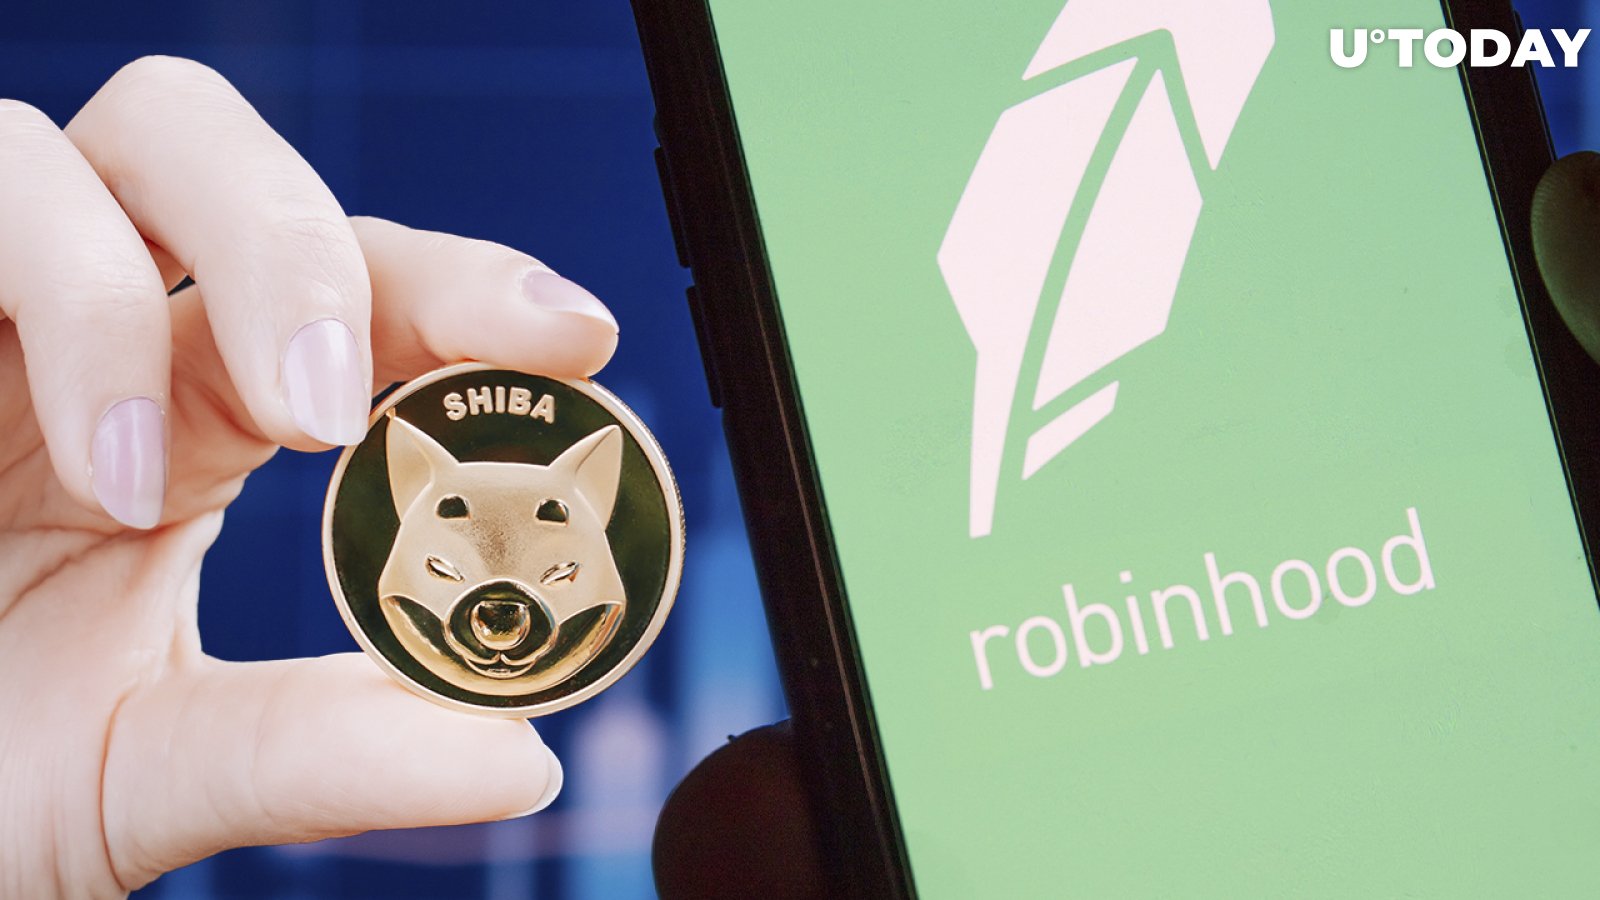 When SHIB? Robinhood CBO States They Seek Compliant Ways to Increase Crypto Offering